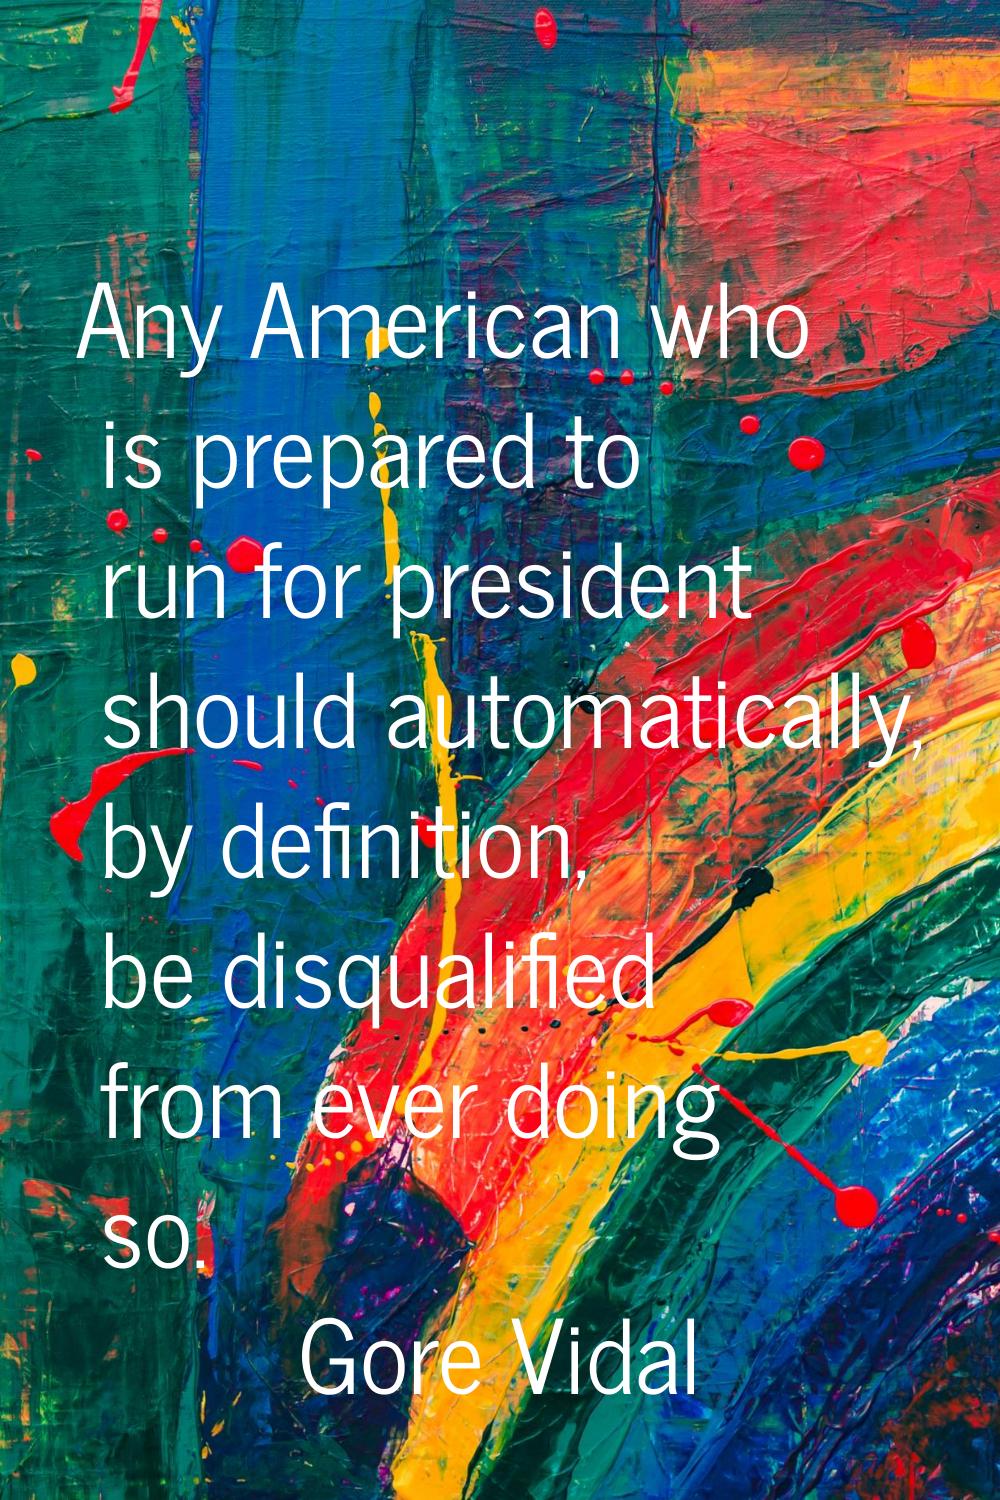 Any American who is prepared to run for president should automatically, by definition, be disqualif